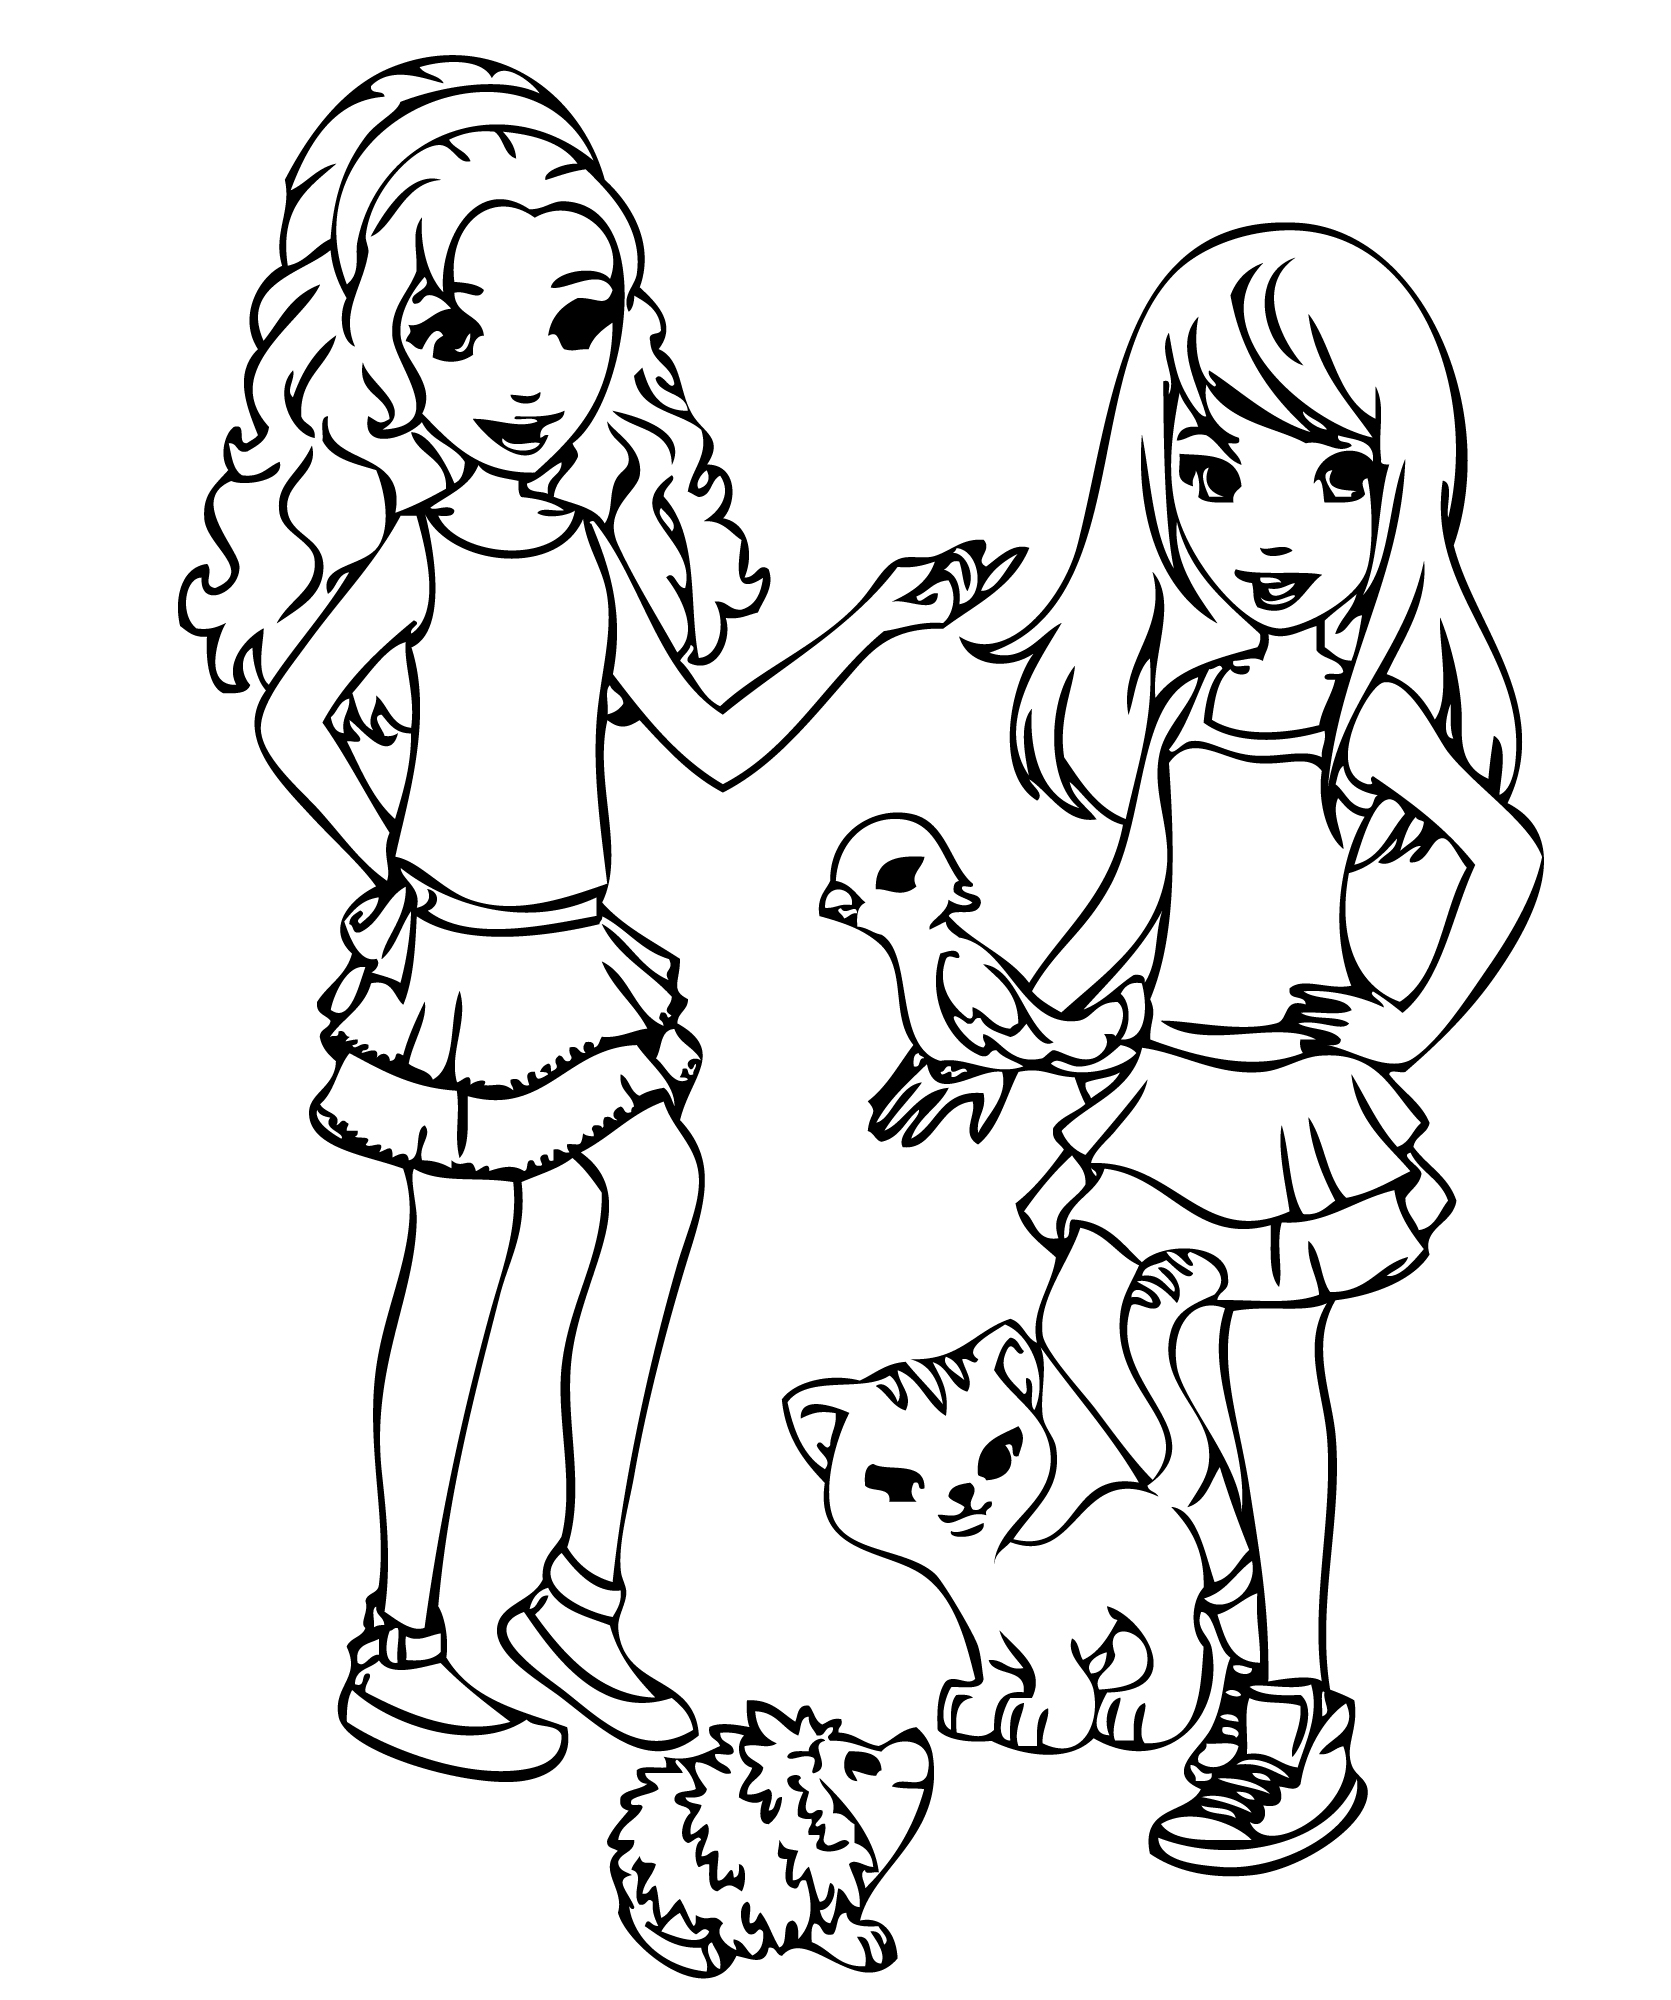 Lego Friends Coloring Pages - Best Coloring Pages For Kids